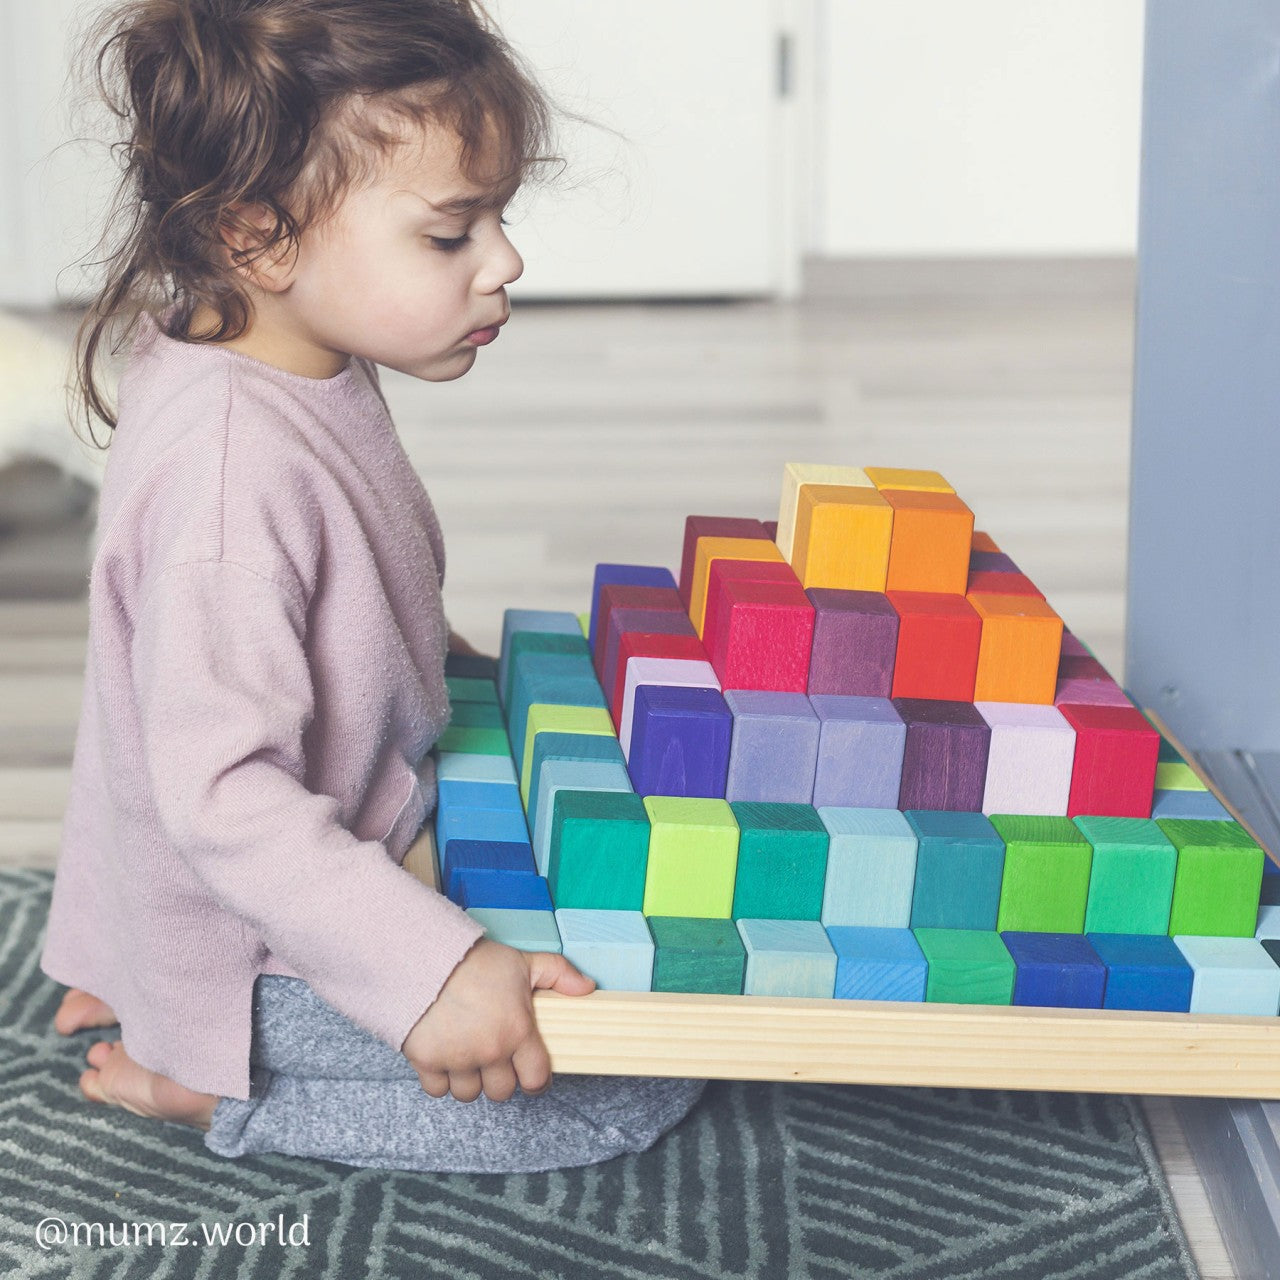 Grimm's Learning - Stepped Pyramid, 4 cm thick 4 x 4 cm Building Sets (large set)